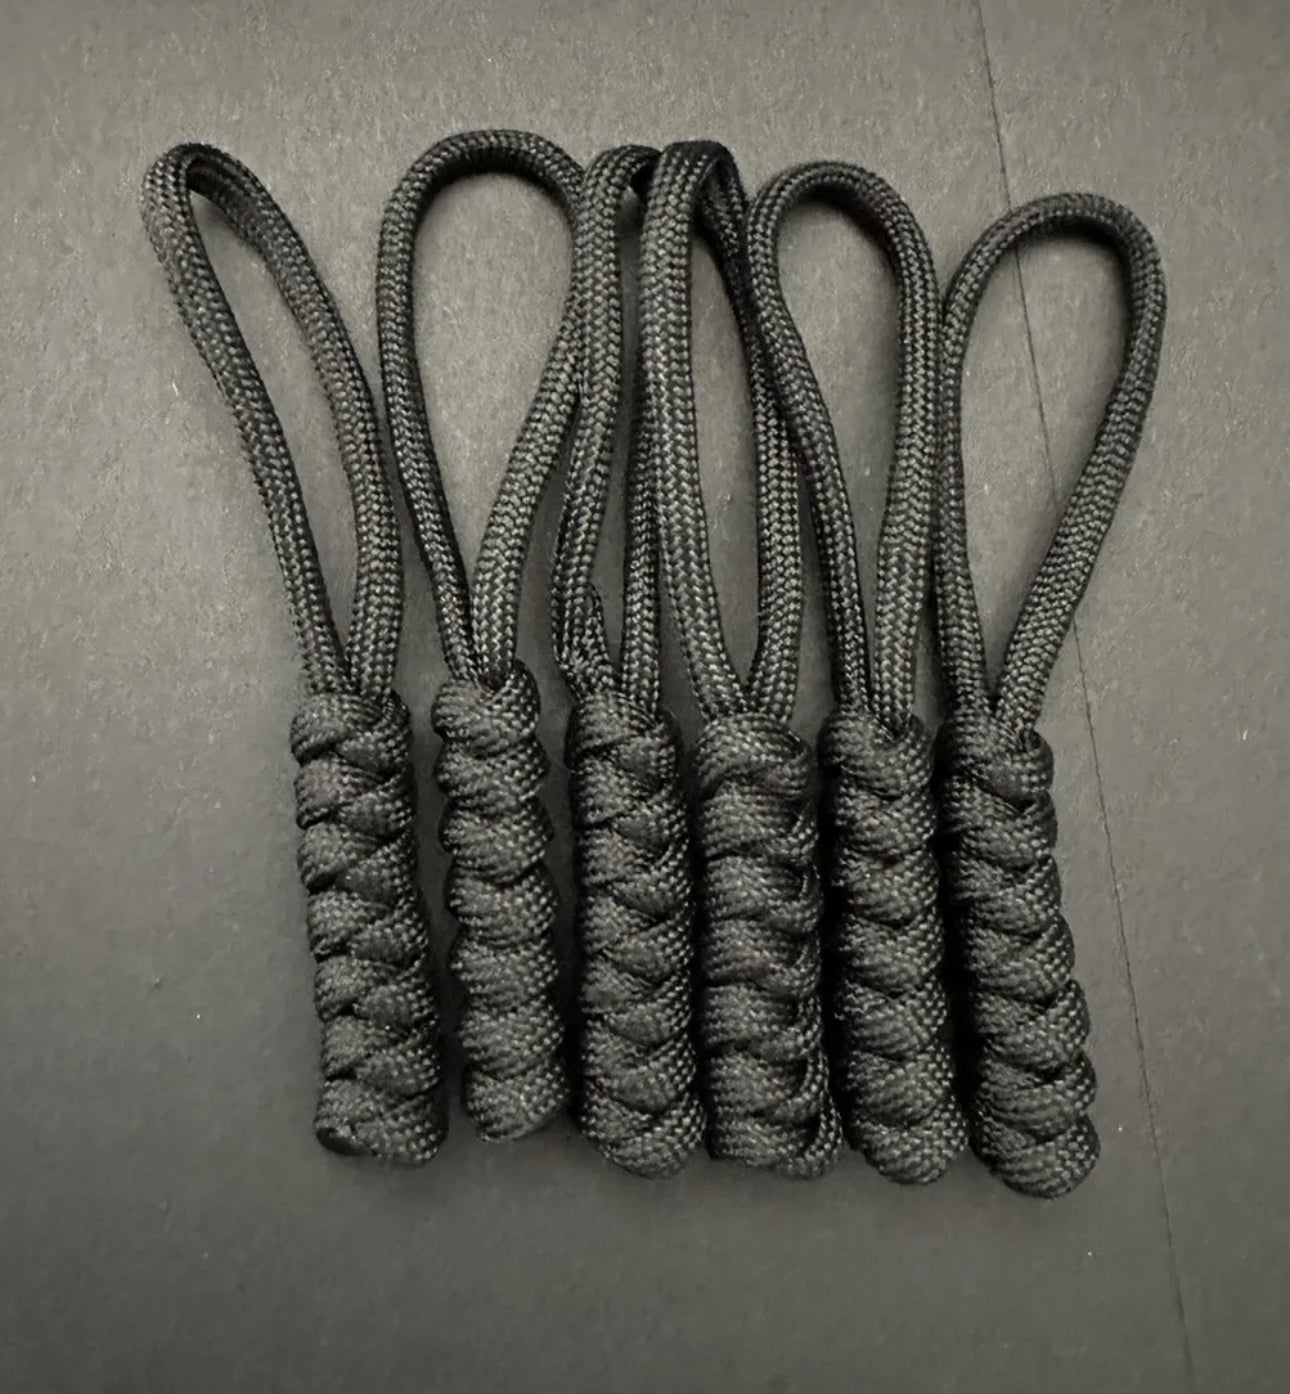 Paracord zip pulls in a Halloween themed black
Sold as a 6 pack theses are light weight, strong and all handmade in our U.K. store